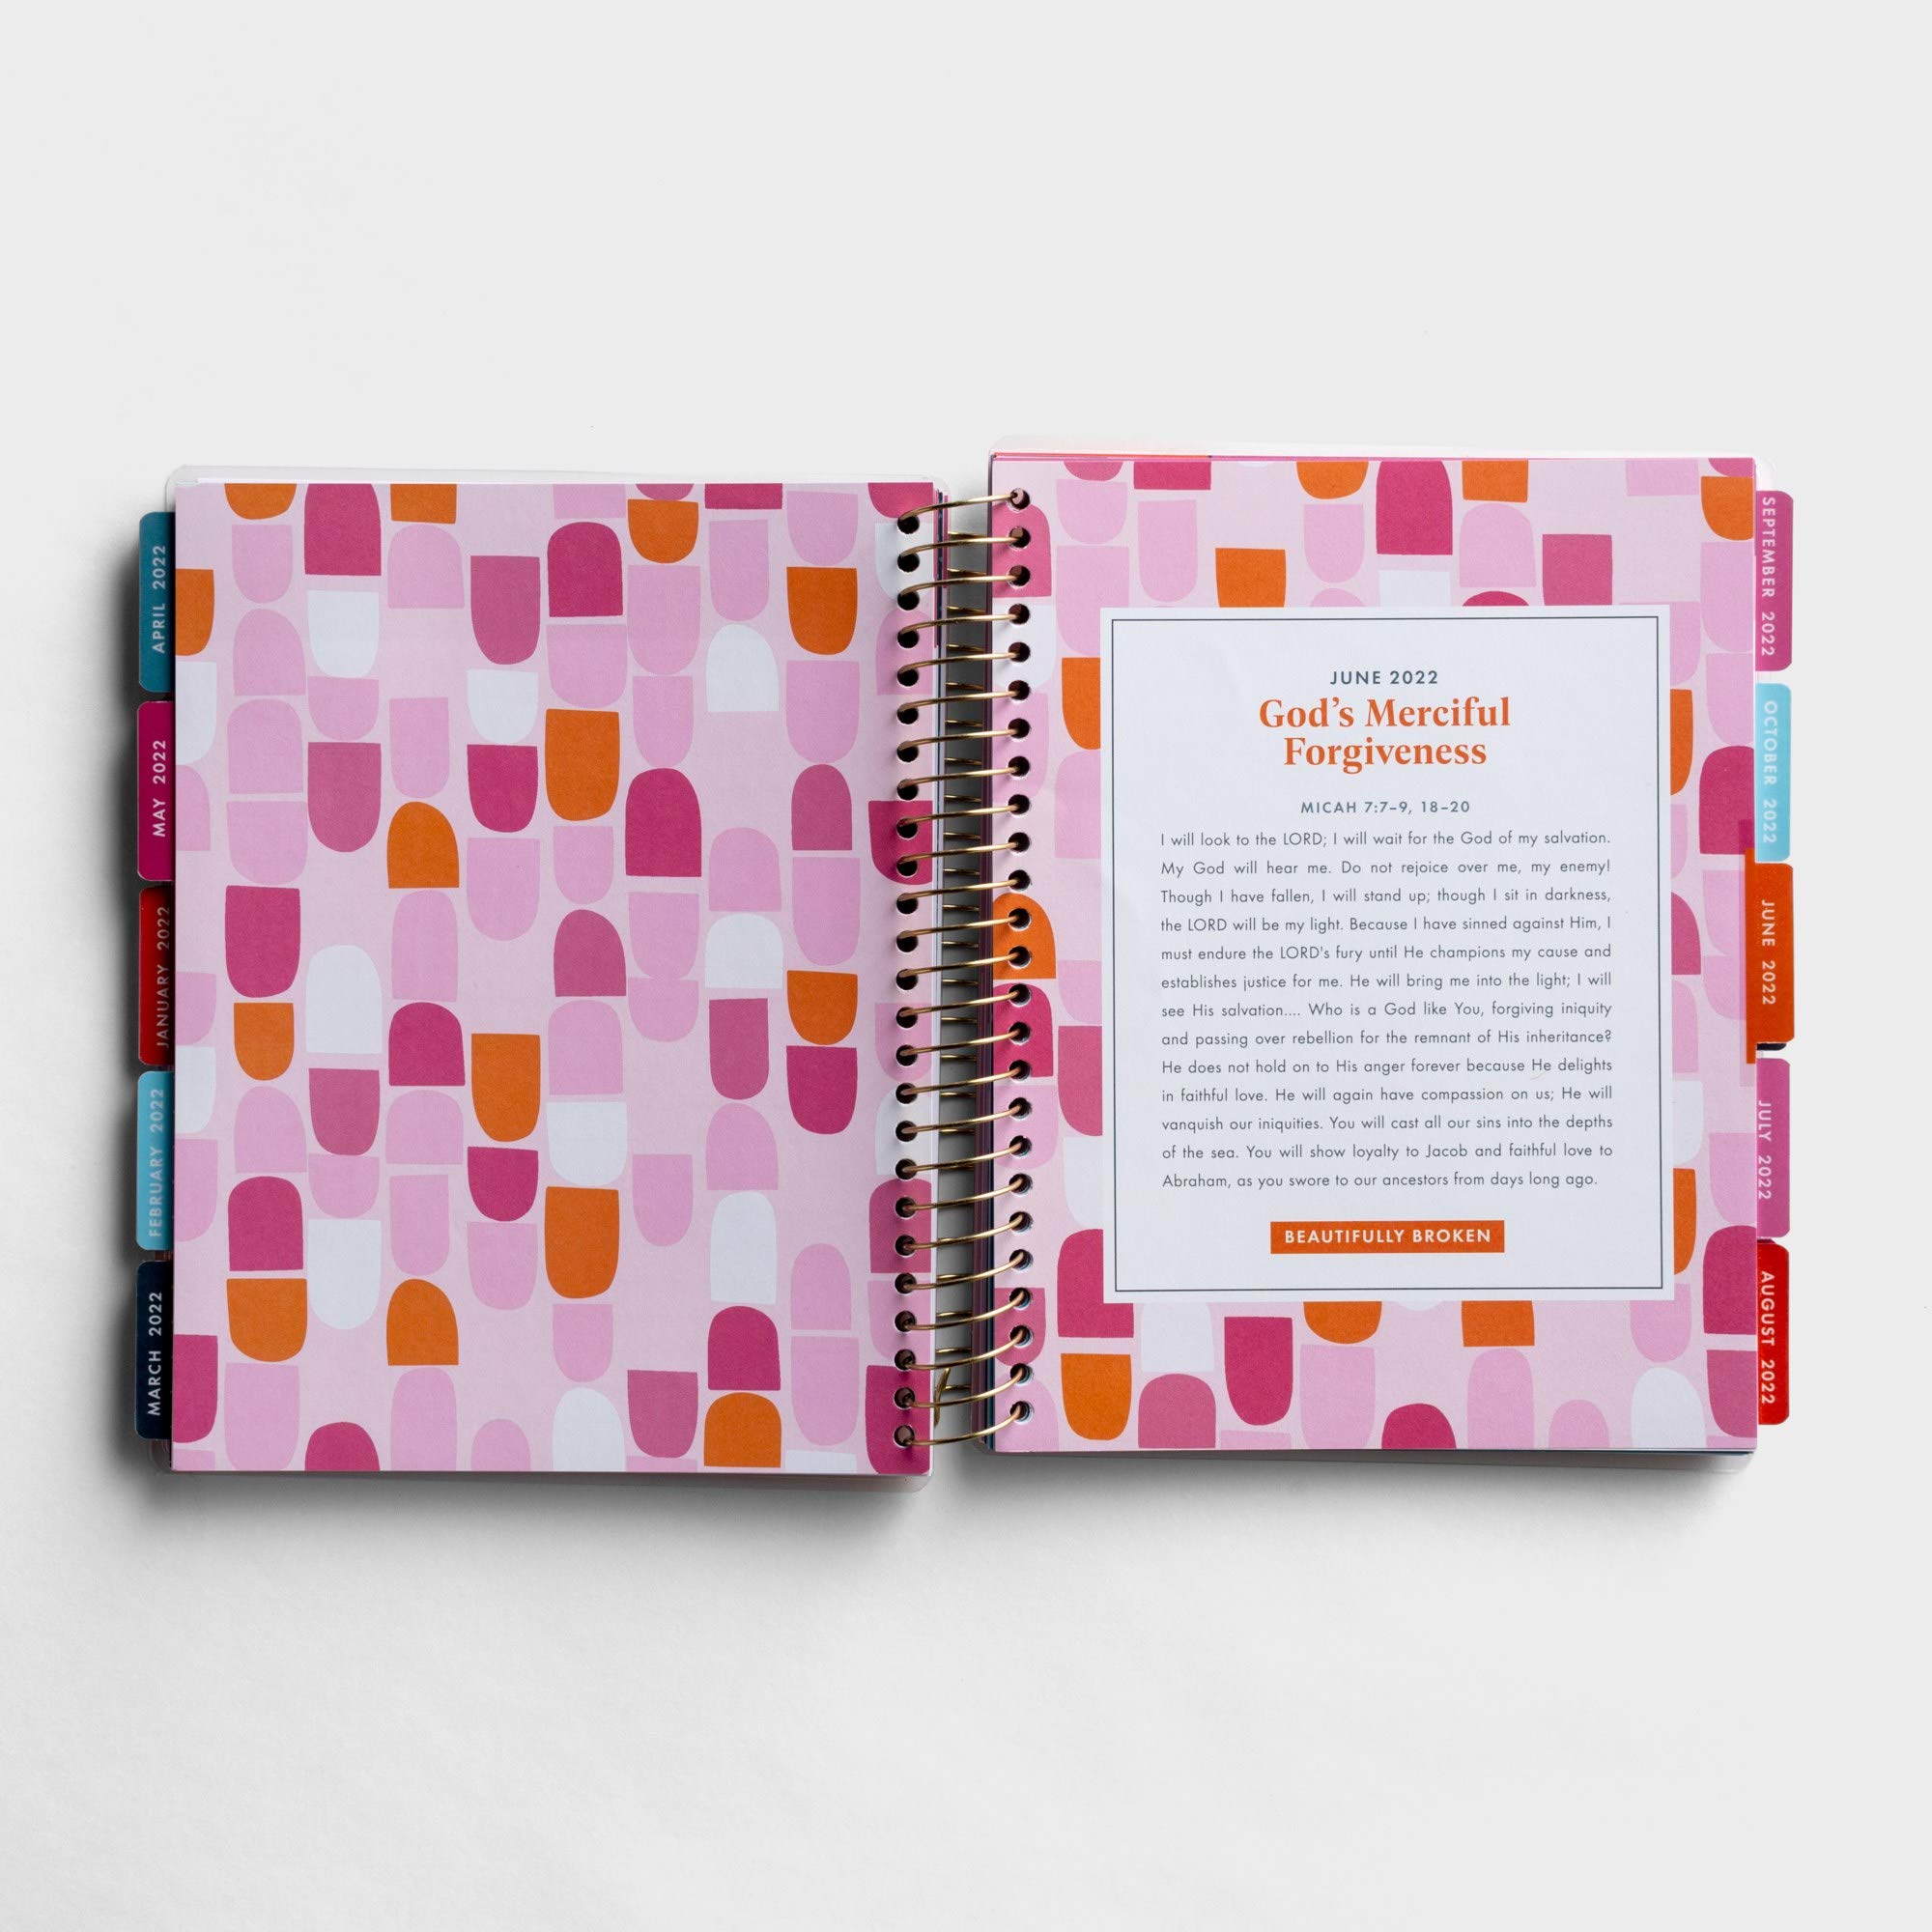 Just Jesus. All Day. Every Day 18-Month Agenda Planner